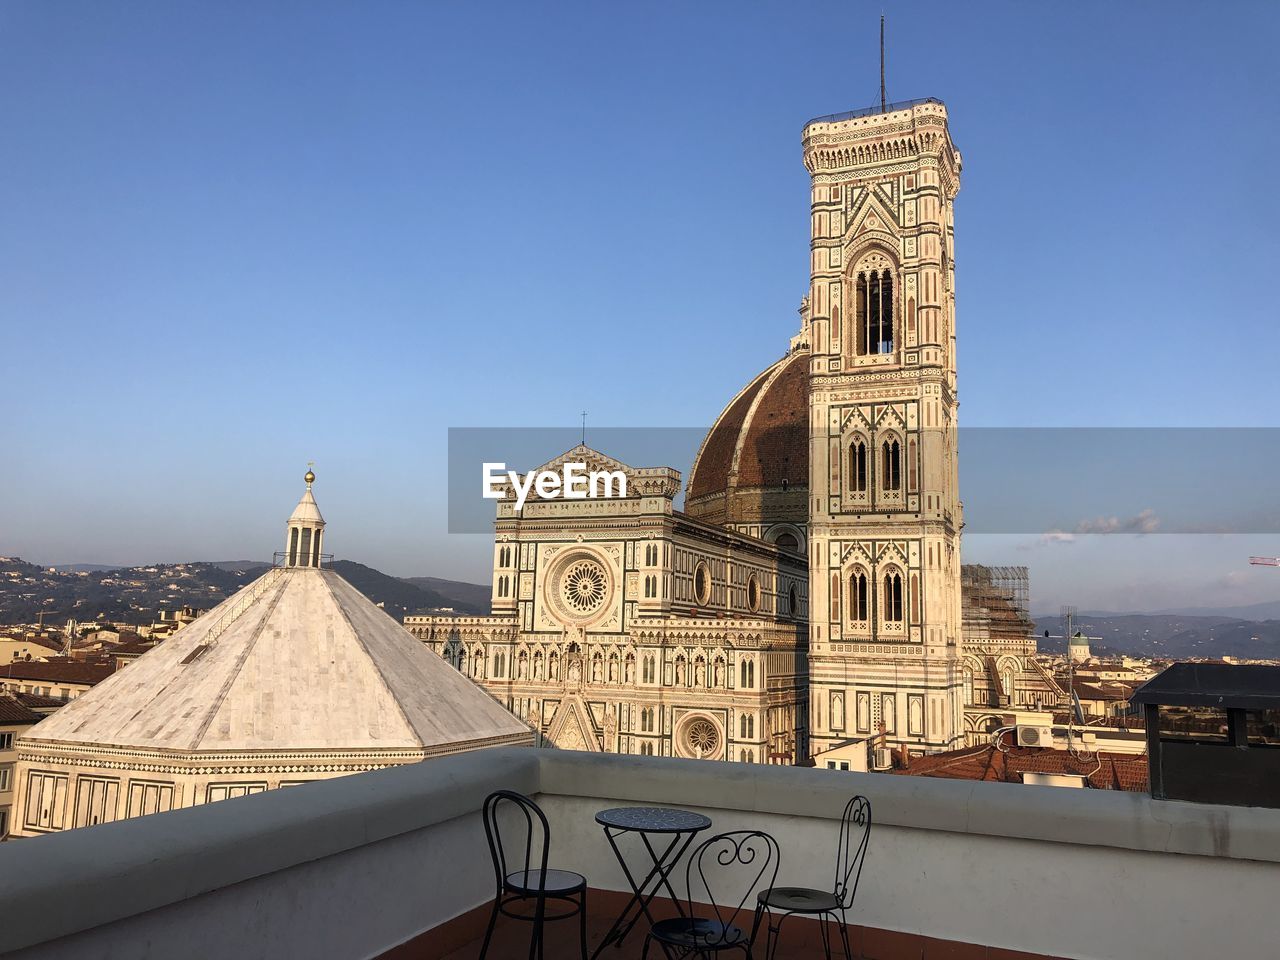 The best view in firenze